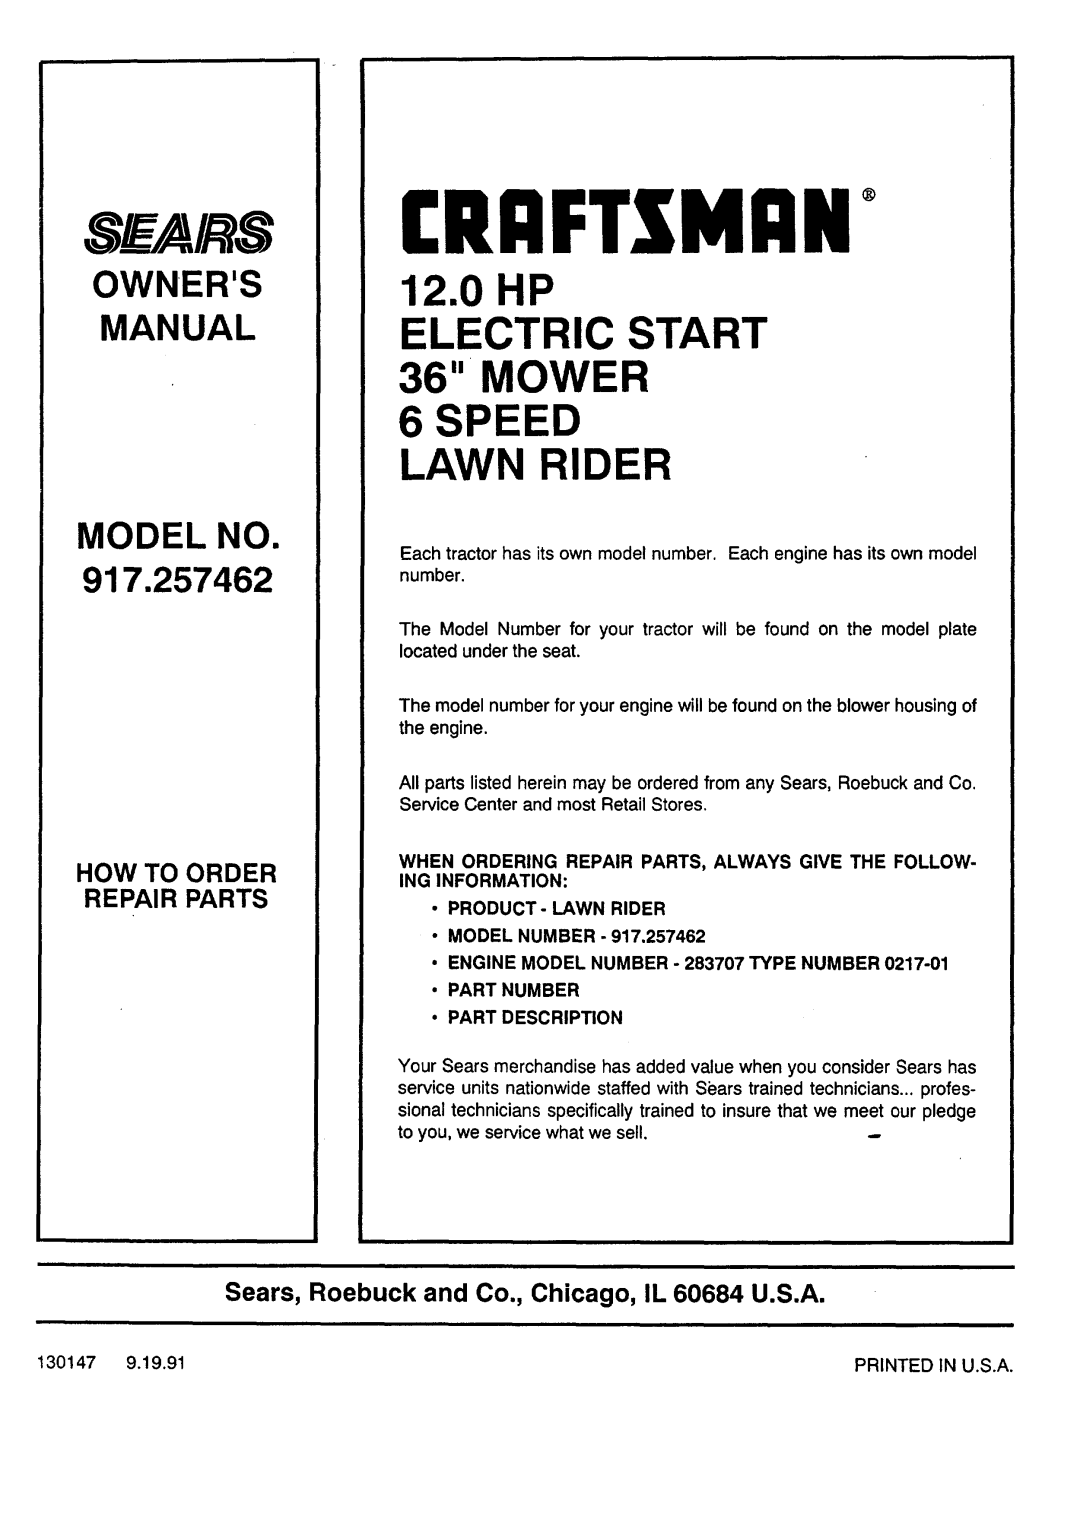 Sears 917.257462 12.0HP ELECTRIC START 36 MOWER 6 SPEED LAWN RIDER, How To Order Repair Parts, Ri:Iftsmi:In, Se_/A/ S 